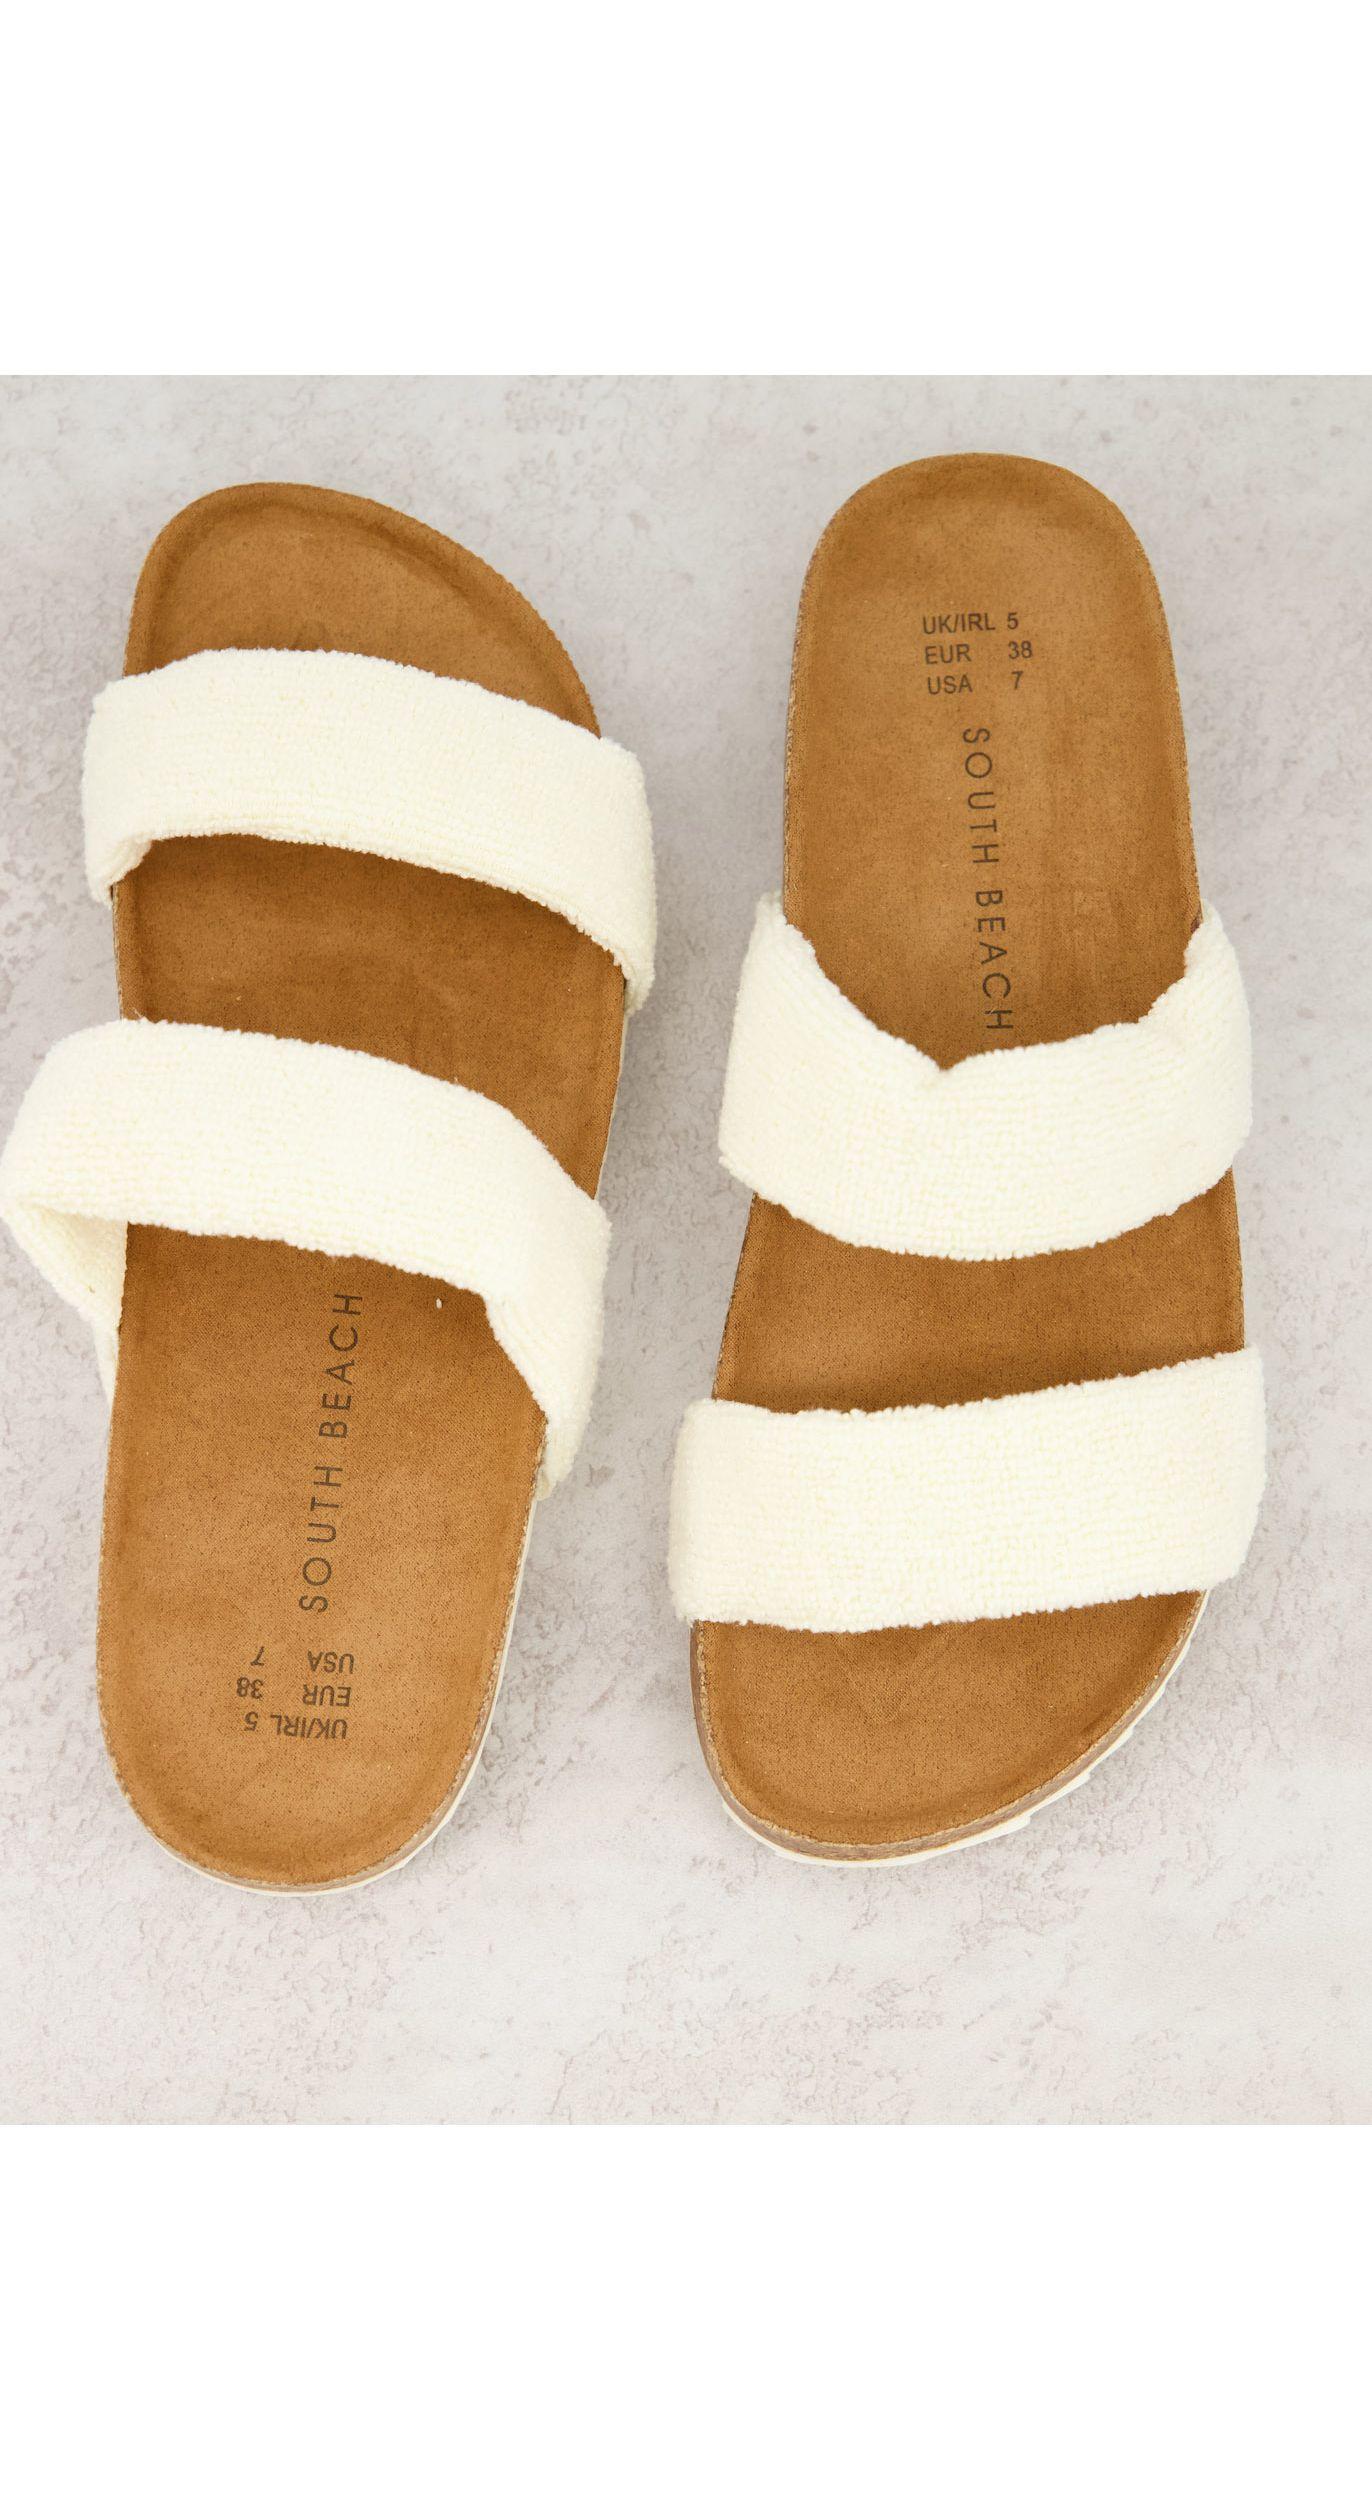 South Beach Exclusive Strap Slides - Lyst